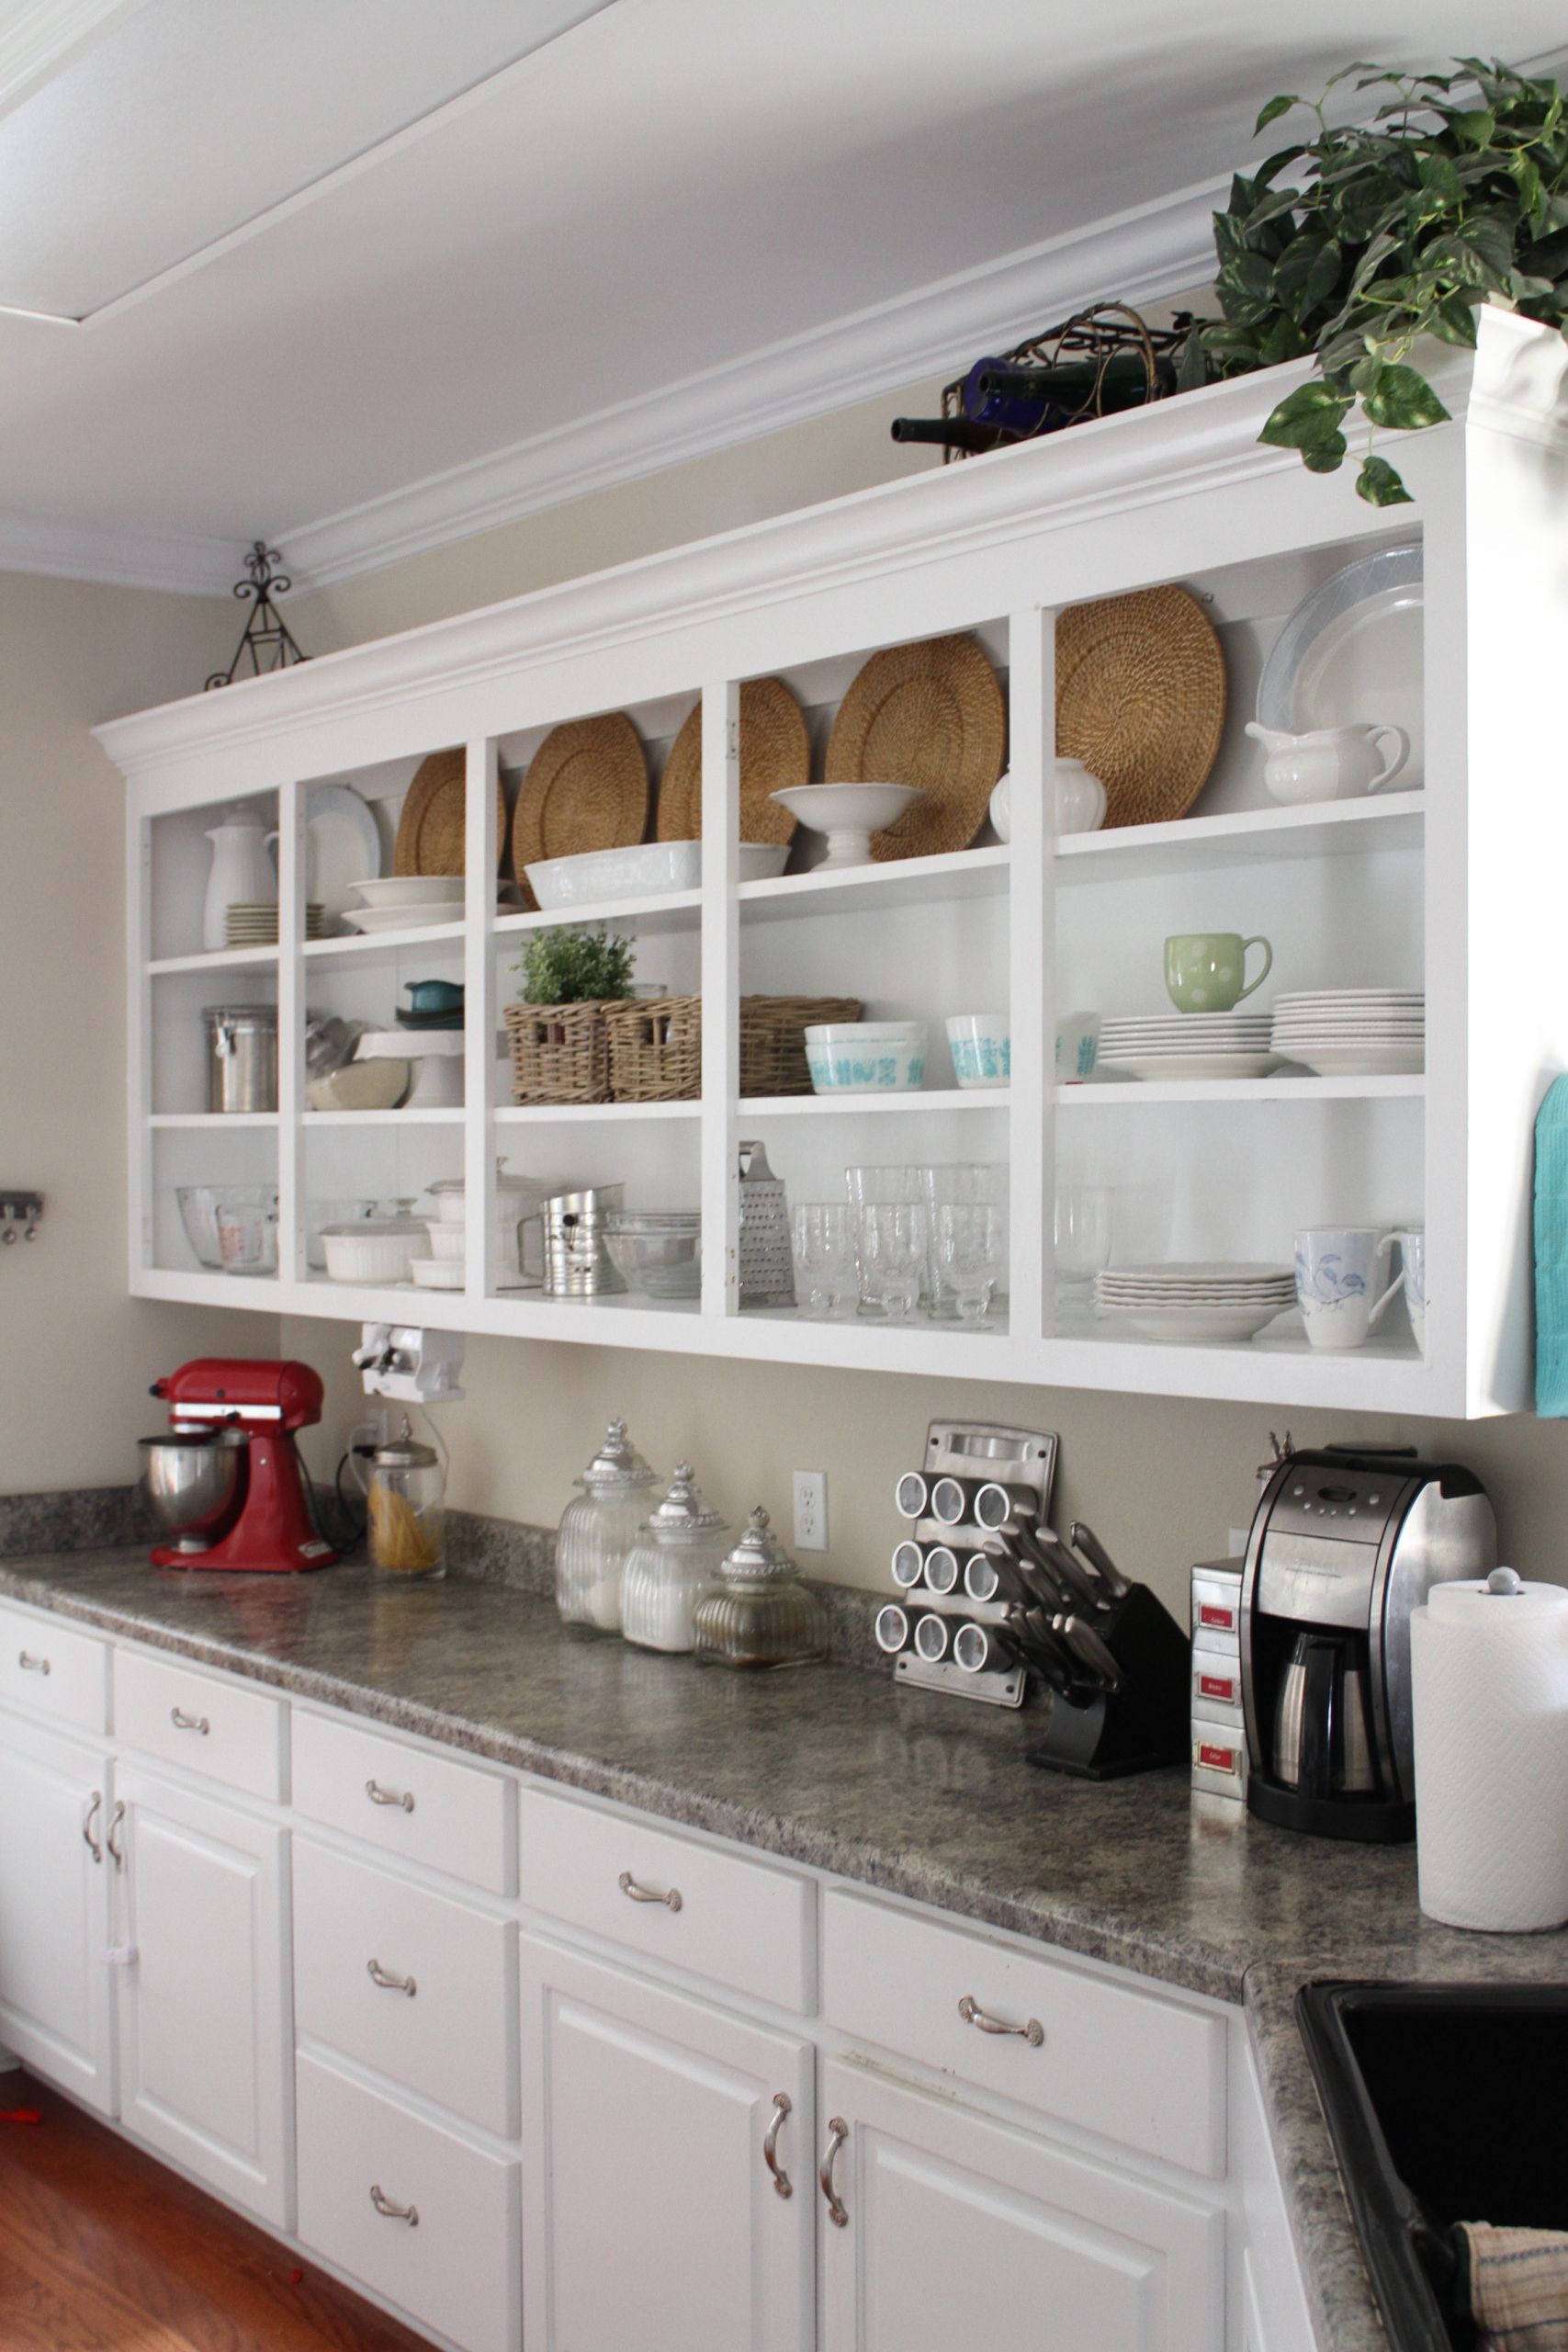 Kitchen Shelves Instead Of Cabinets Inspirational Cottage Style Of Kitchen Shelves Instead Of Cabinets Scaled 